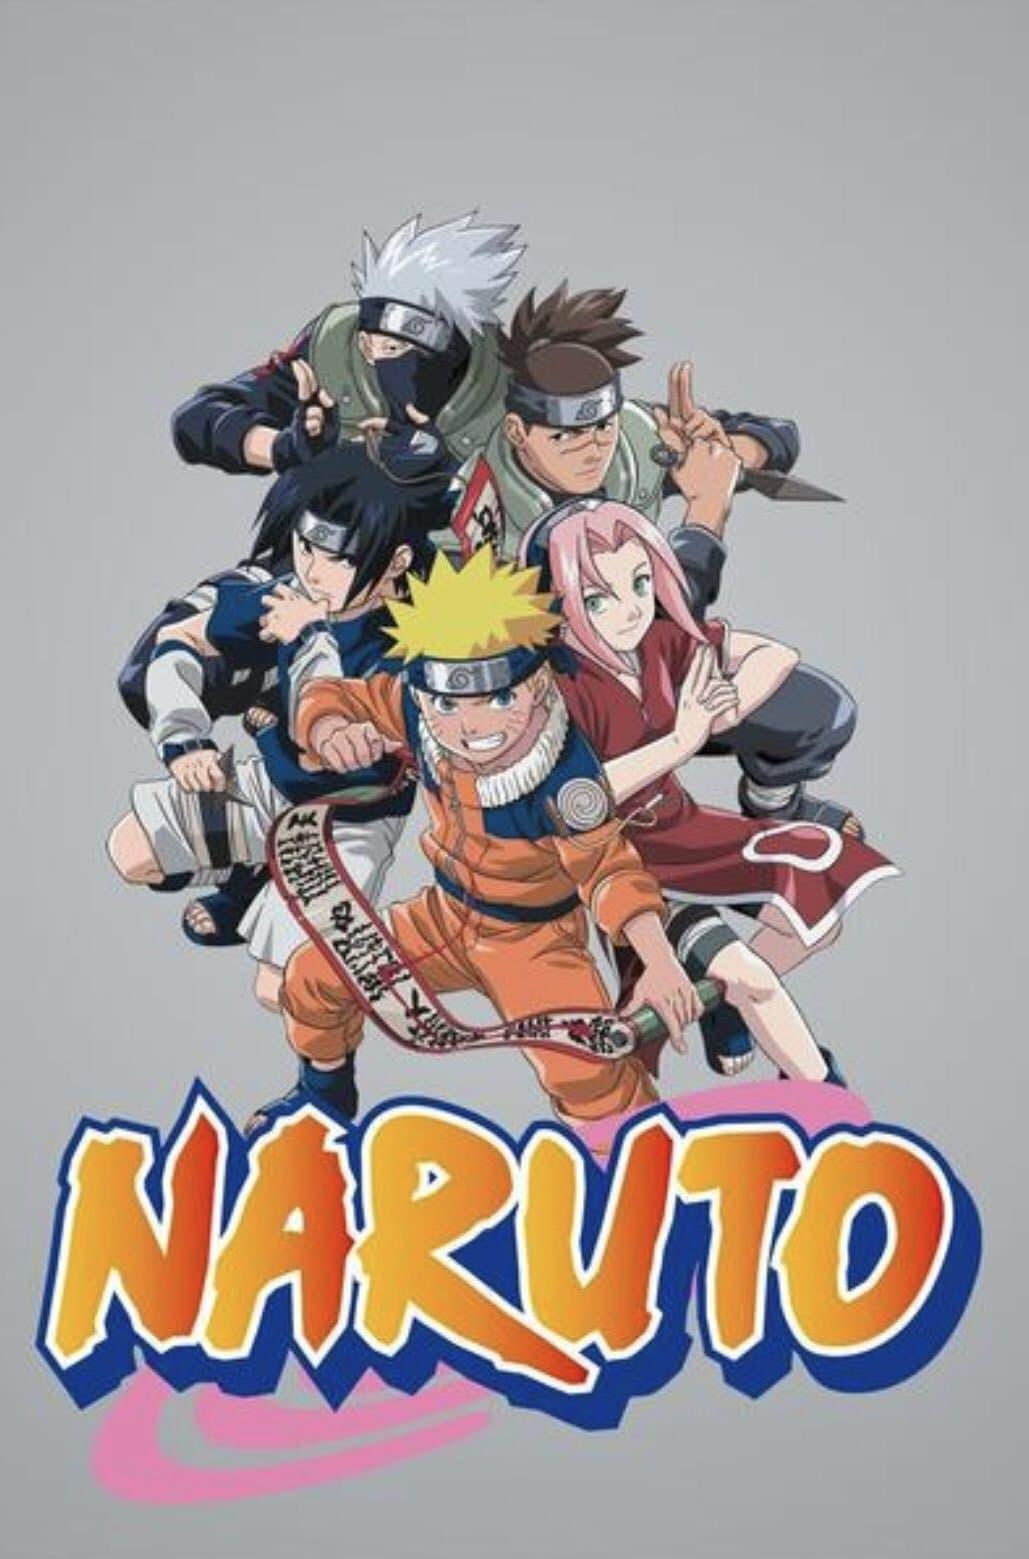 1029 x 1559 · jpeg - Naruto TV Show Poster - ID: 349259 - Image Abyss